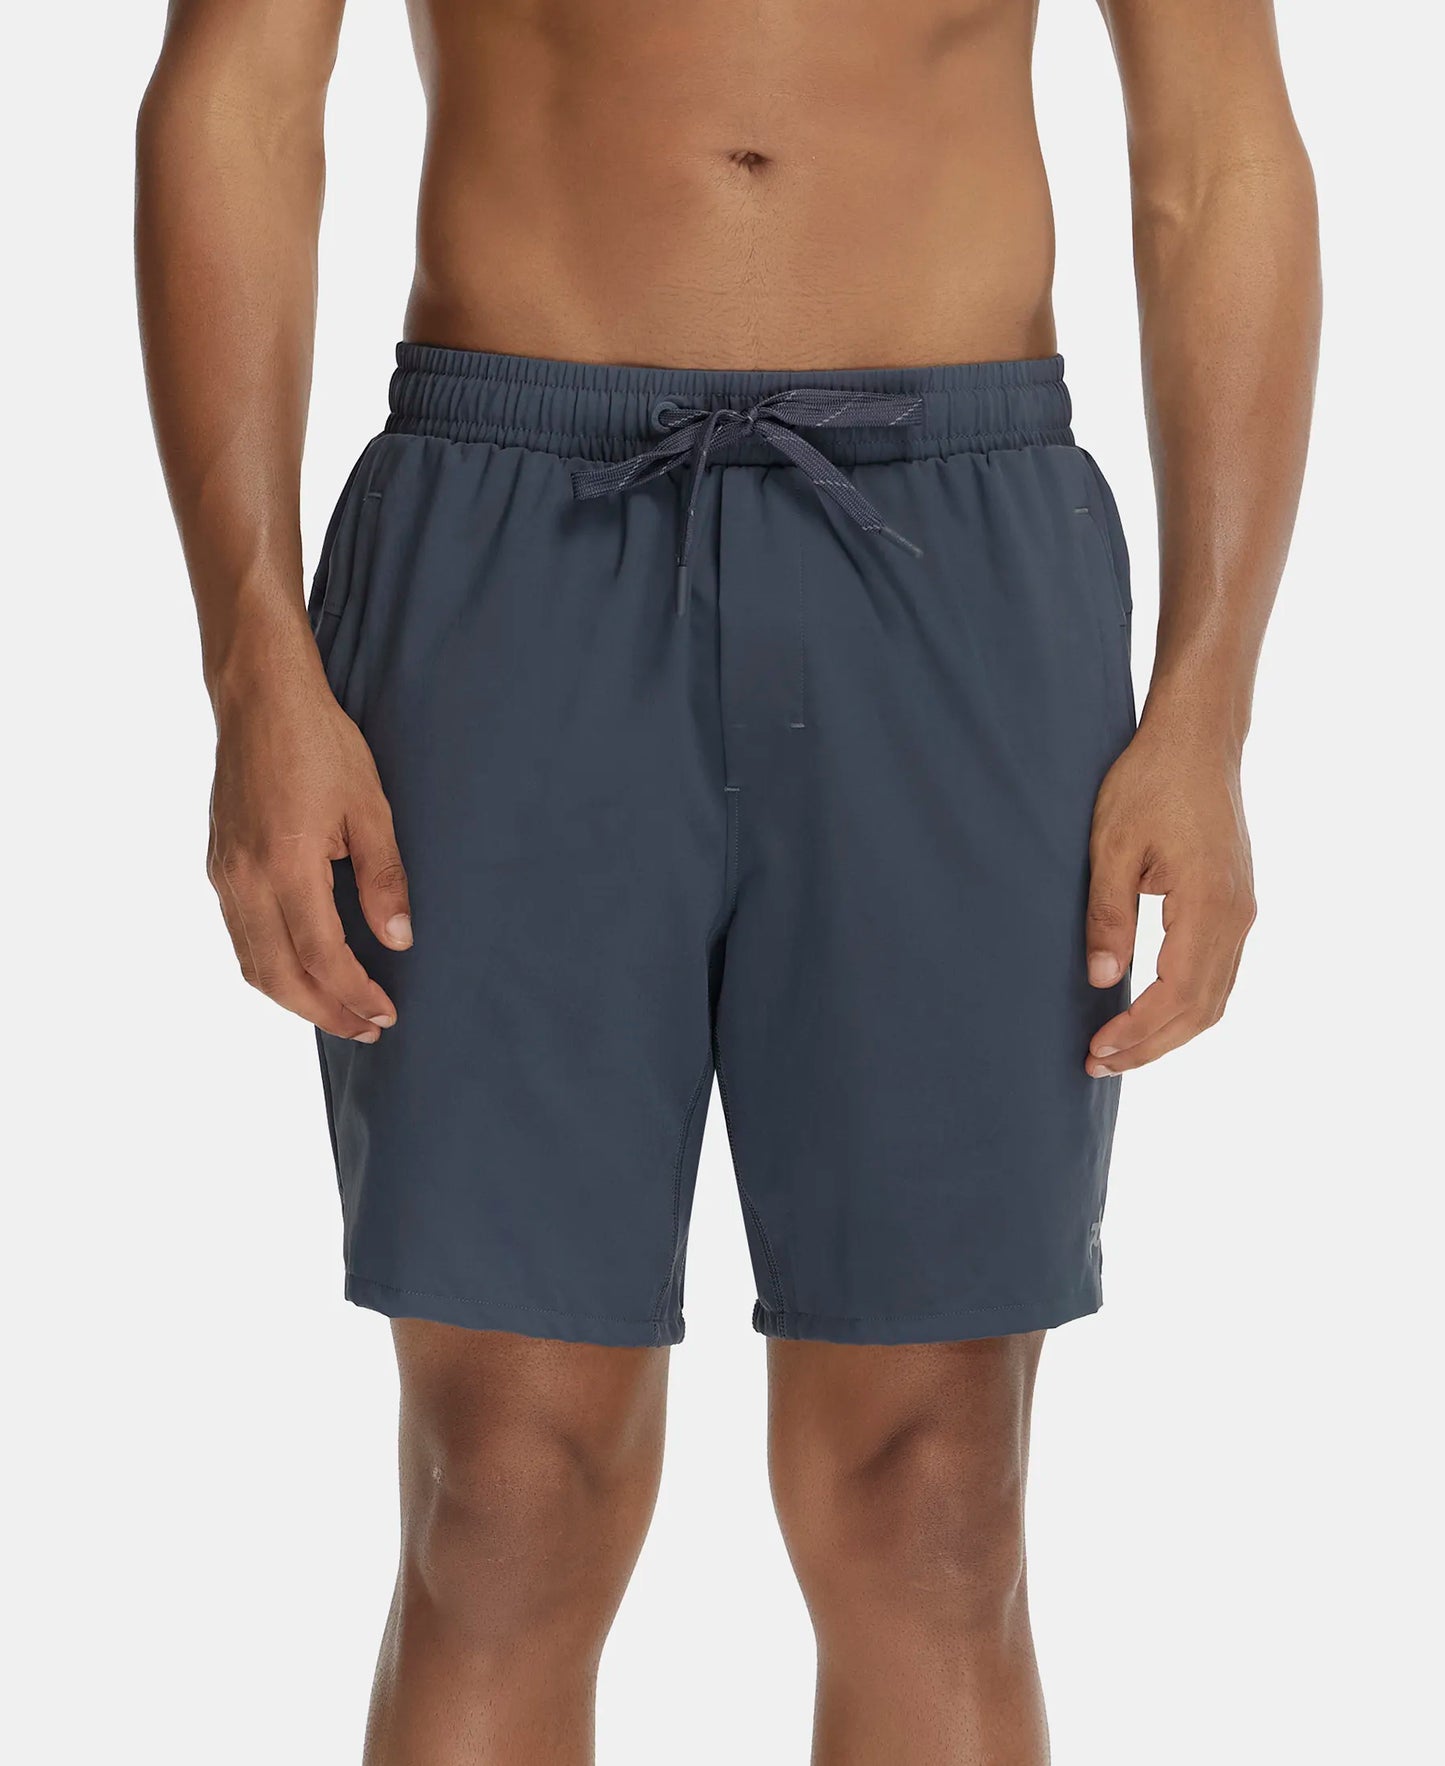 Recycled Microfiber Elastane Stretch Solid Shorts with Zipper Pocket and StayFresh Treatment - Graphite-1